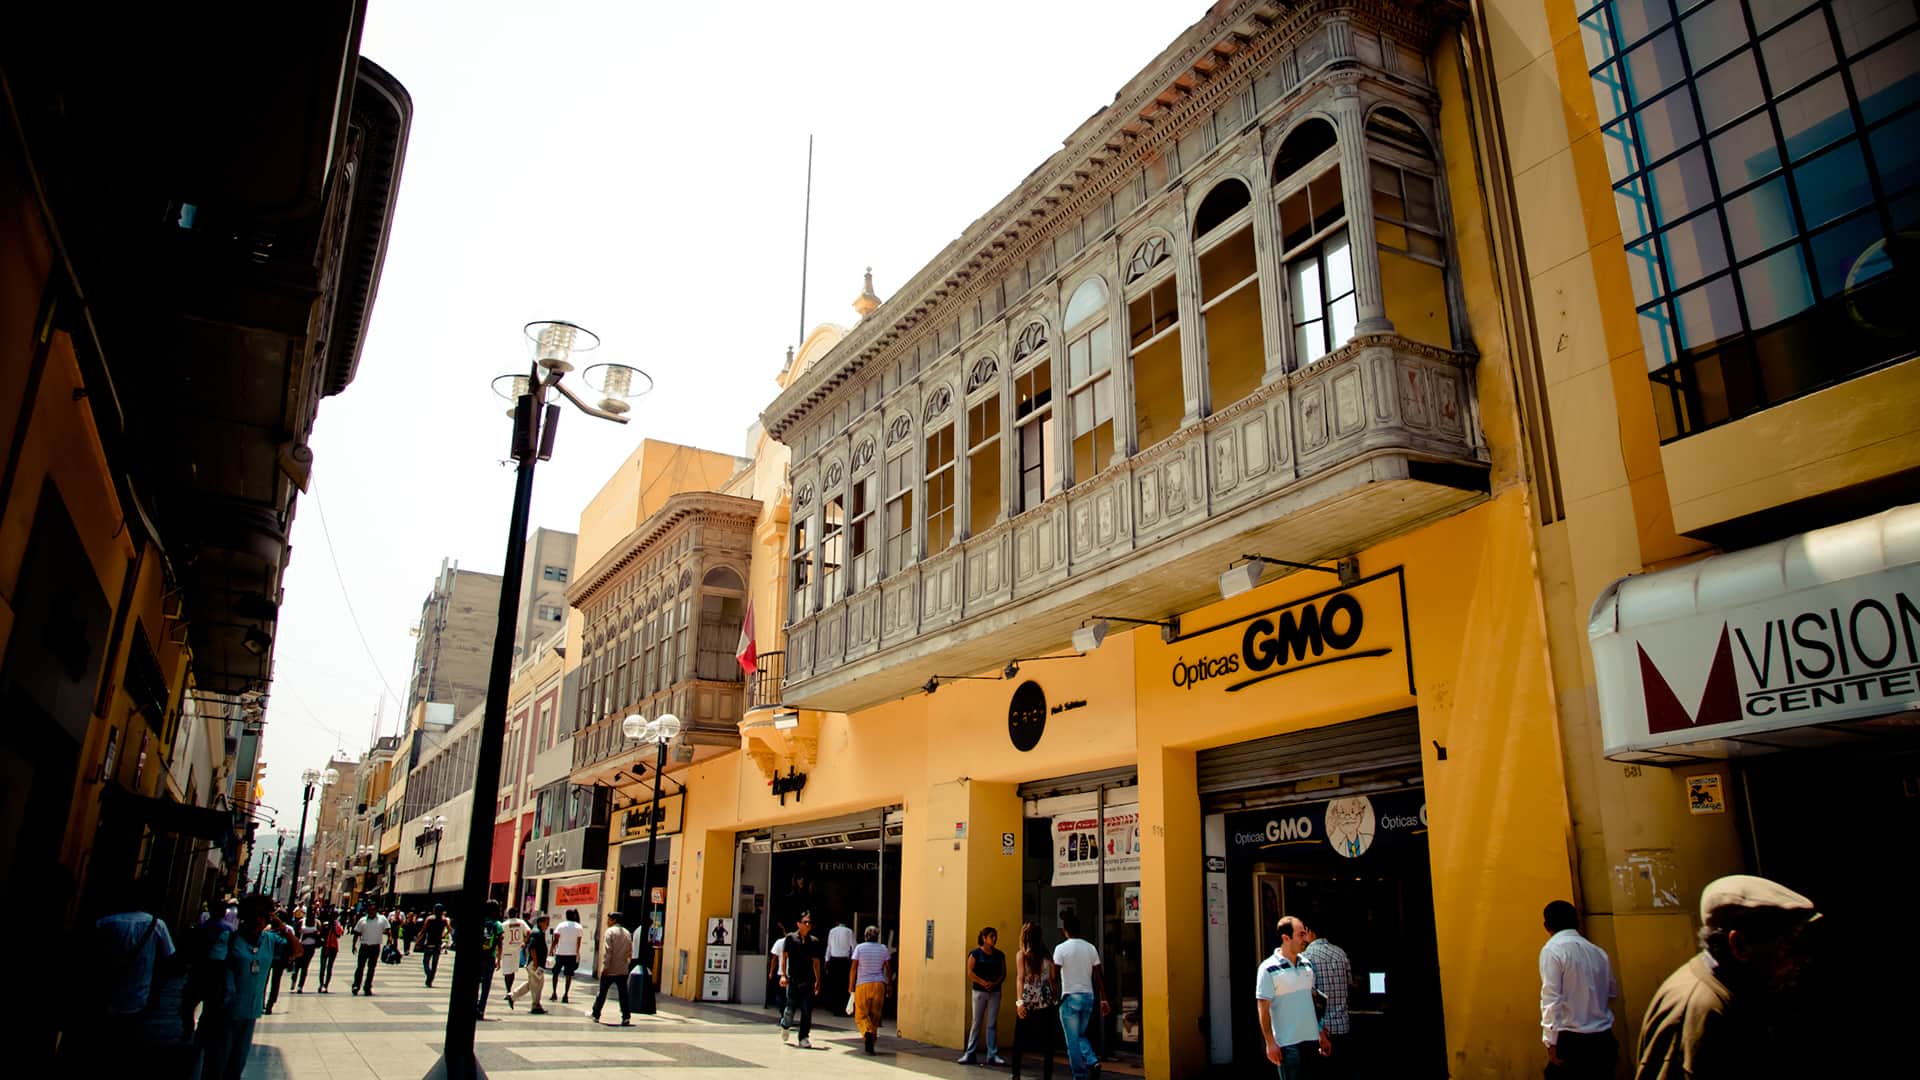 General aspect of the main walking street in the city center of Lima, balconies are one of the highlights | Responsible Travel Peru